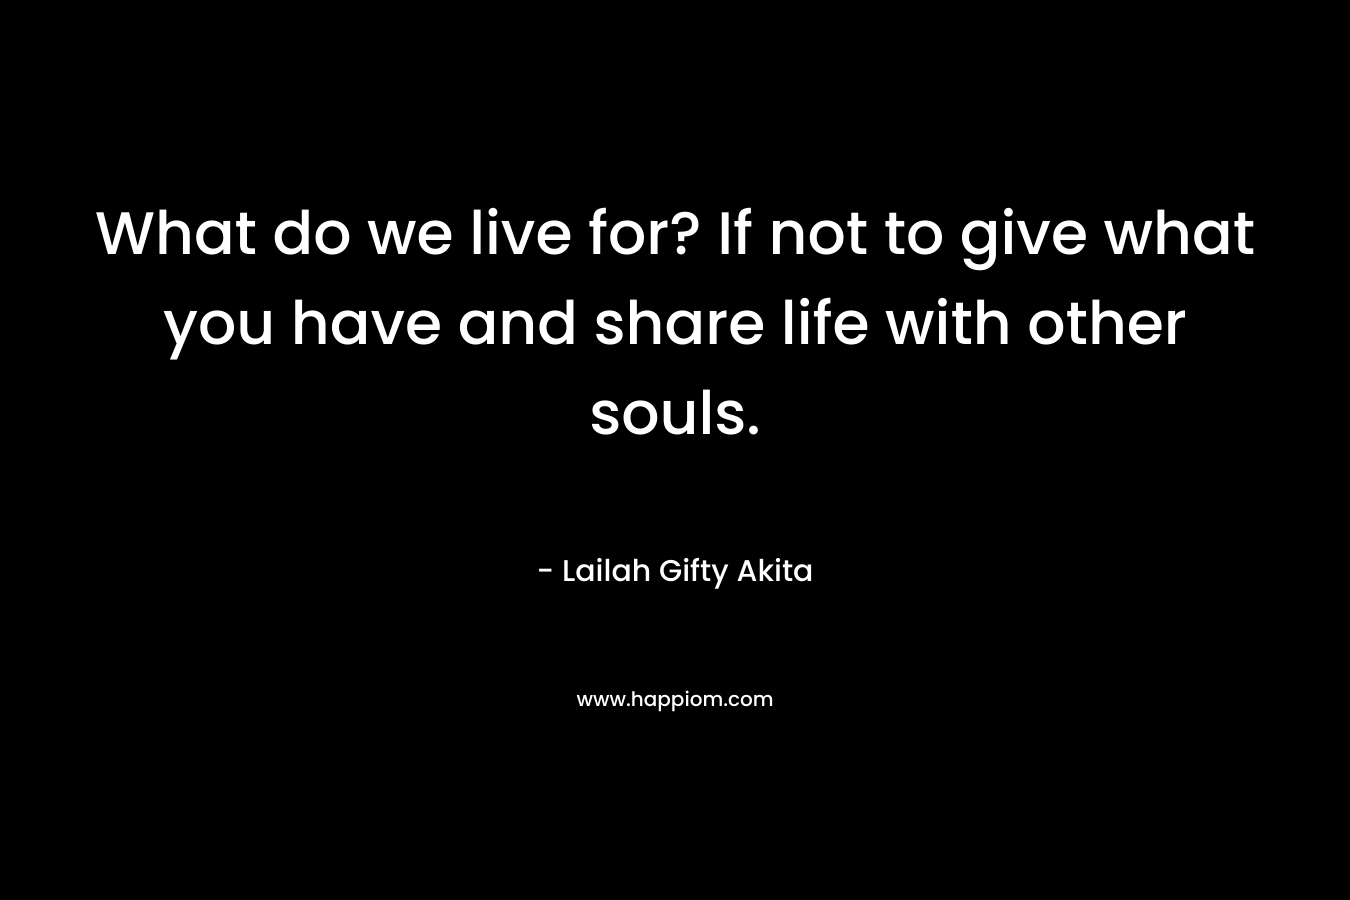 What do we live for? If not to give what you have and share life with other souls.